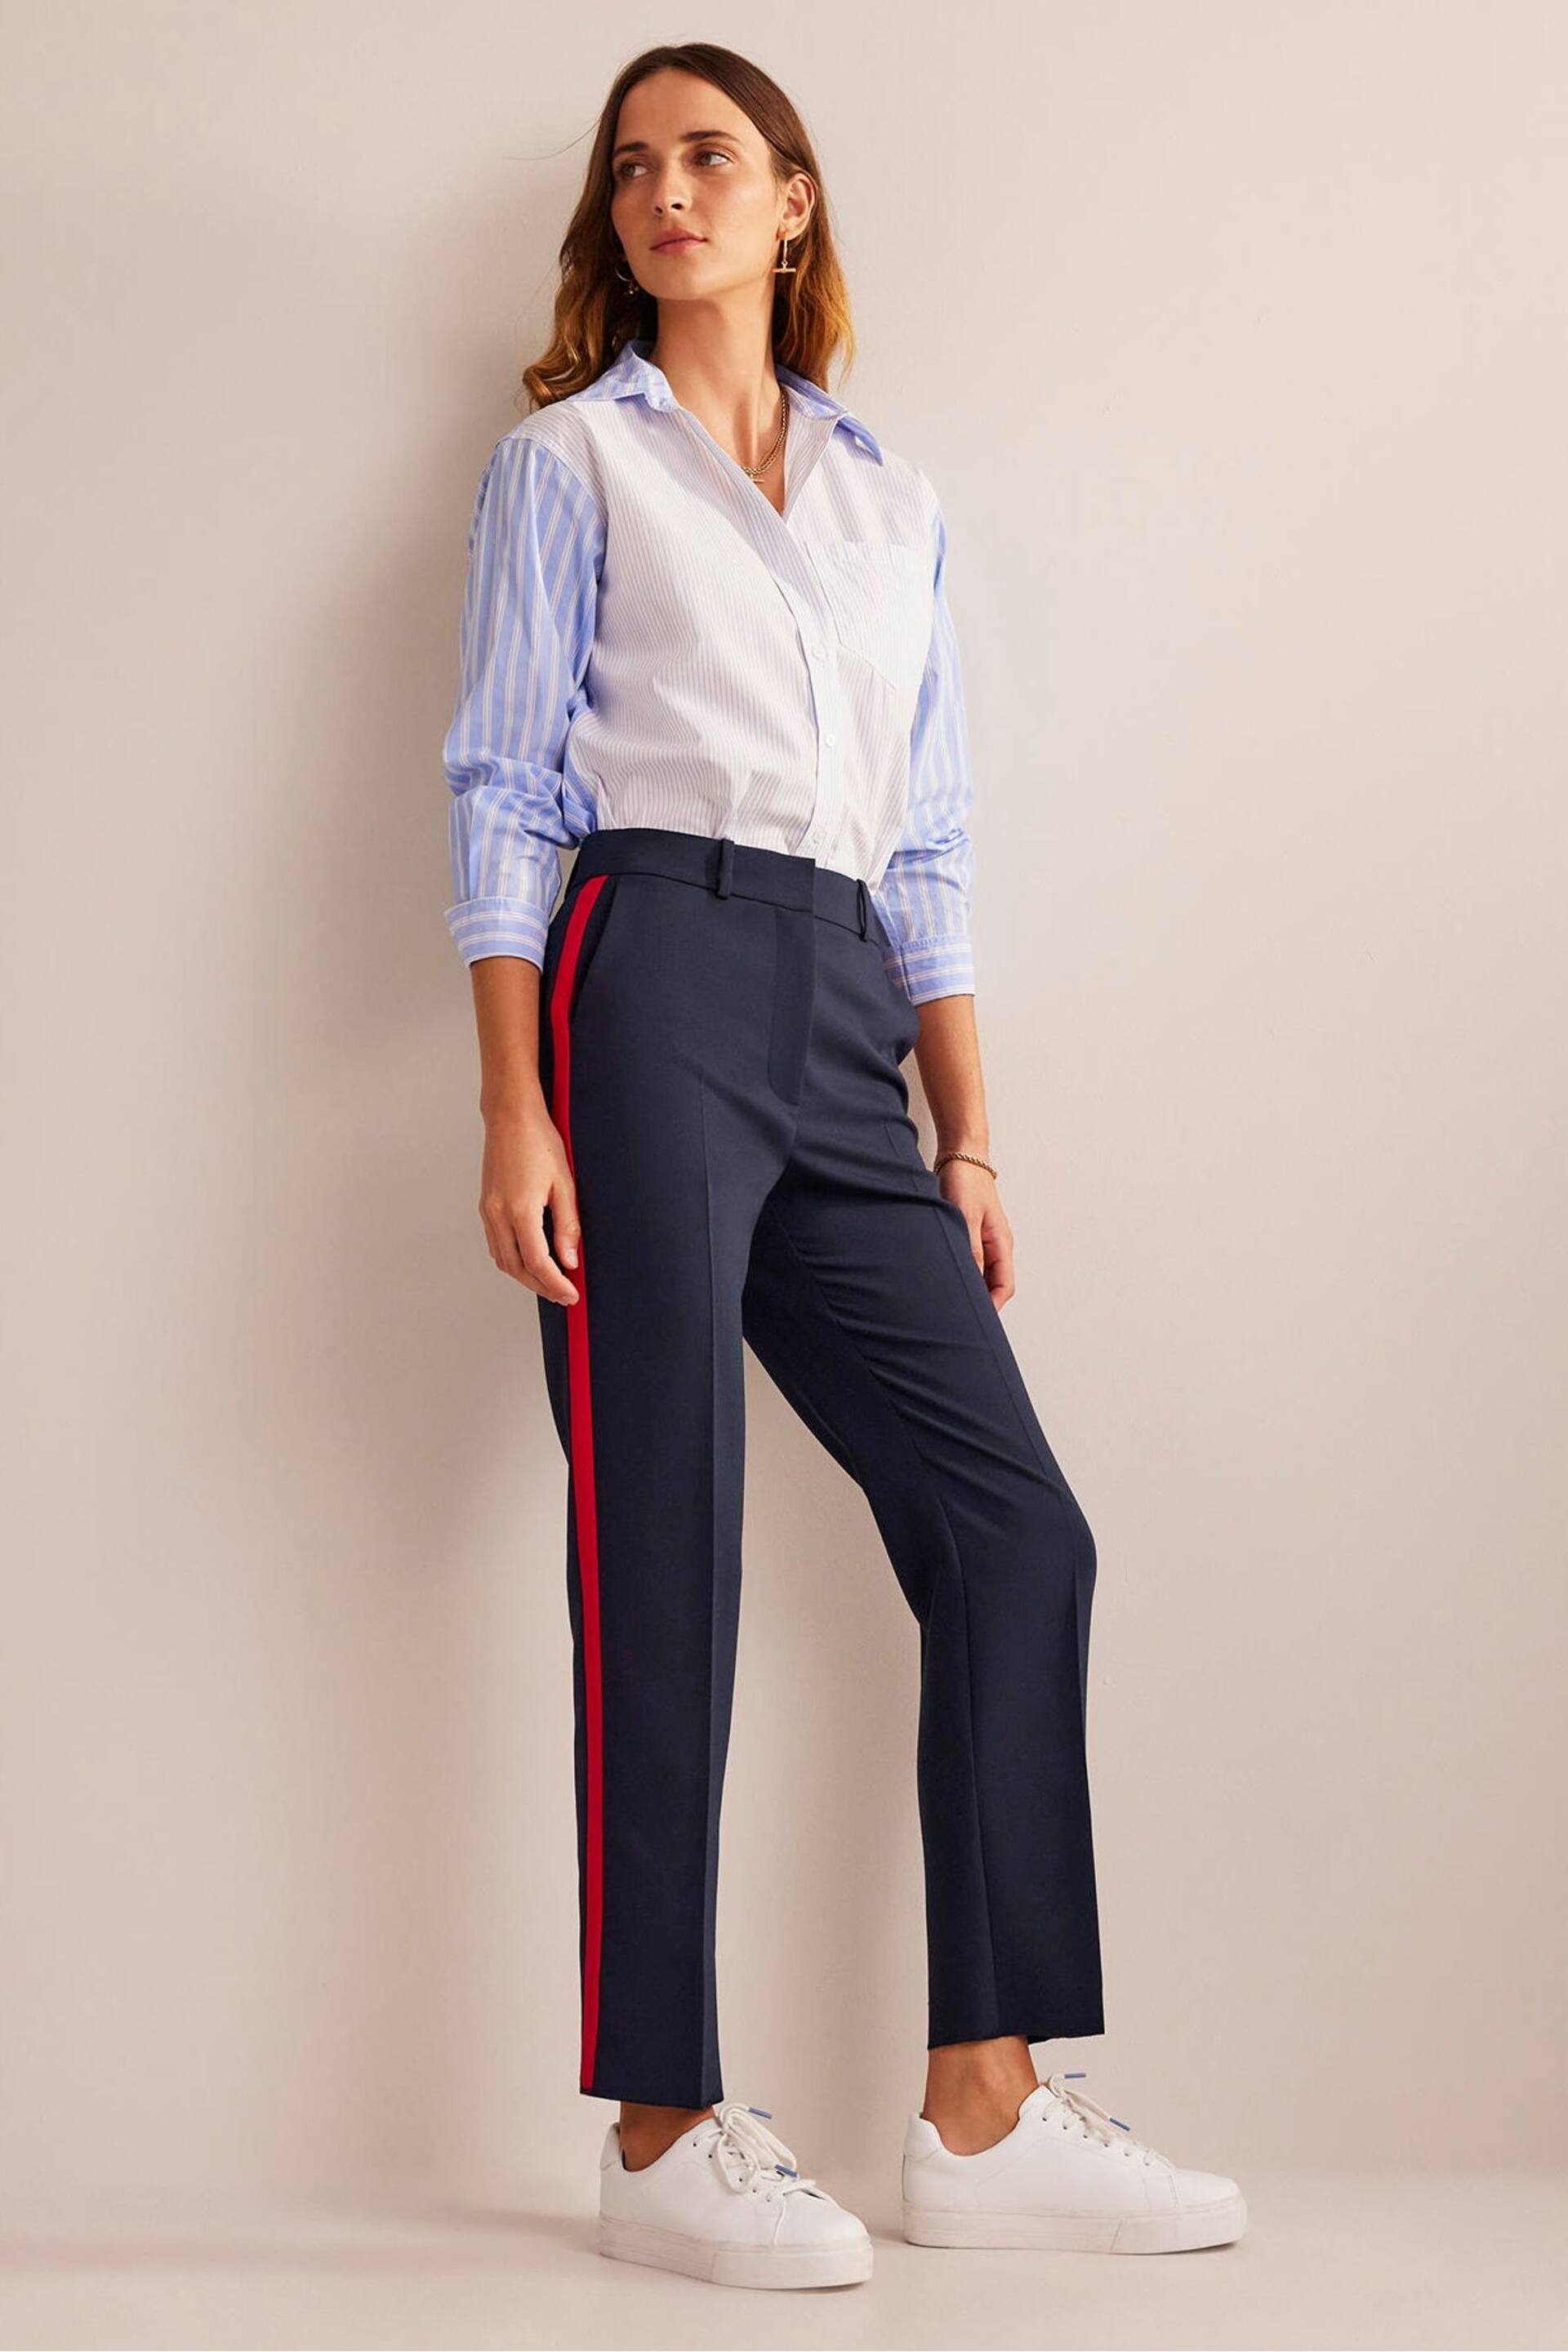 Boden Blue Ground Petite Kew Side Stripe Trousers - Image 3 of 5